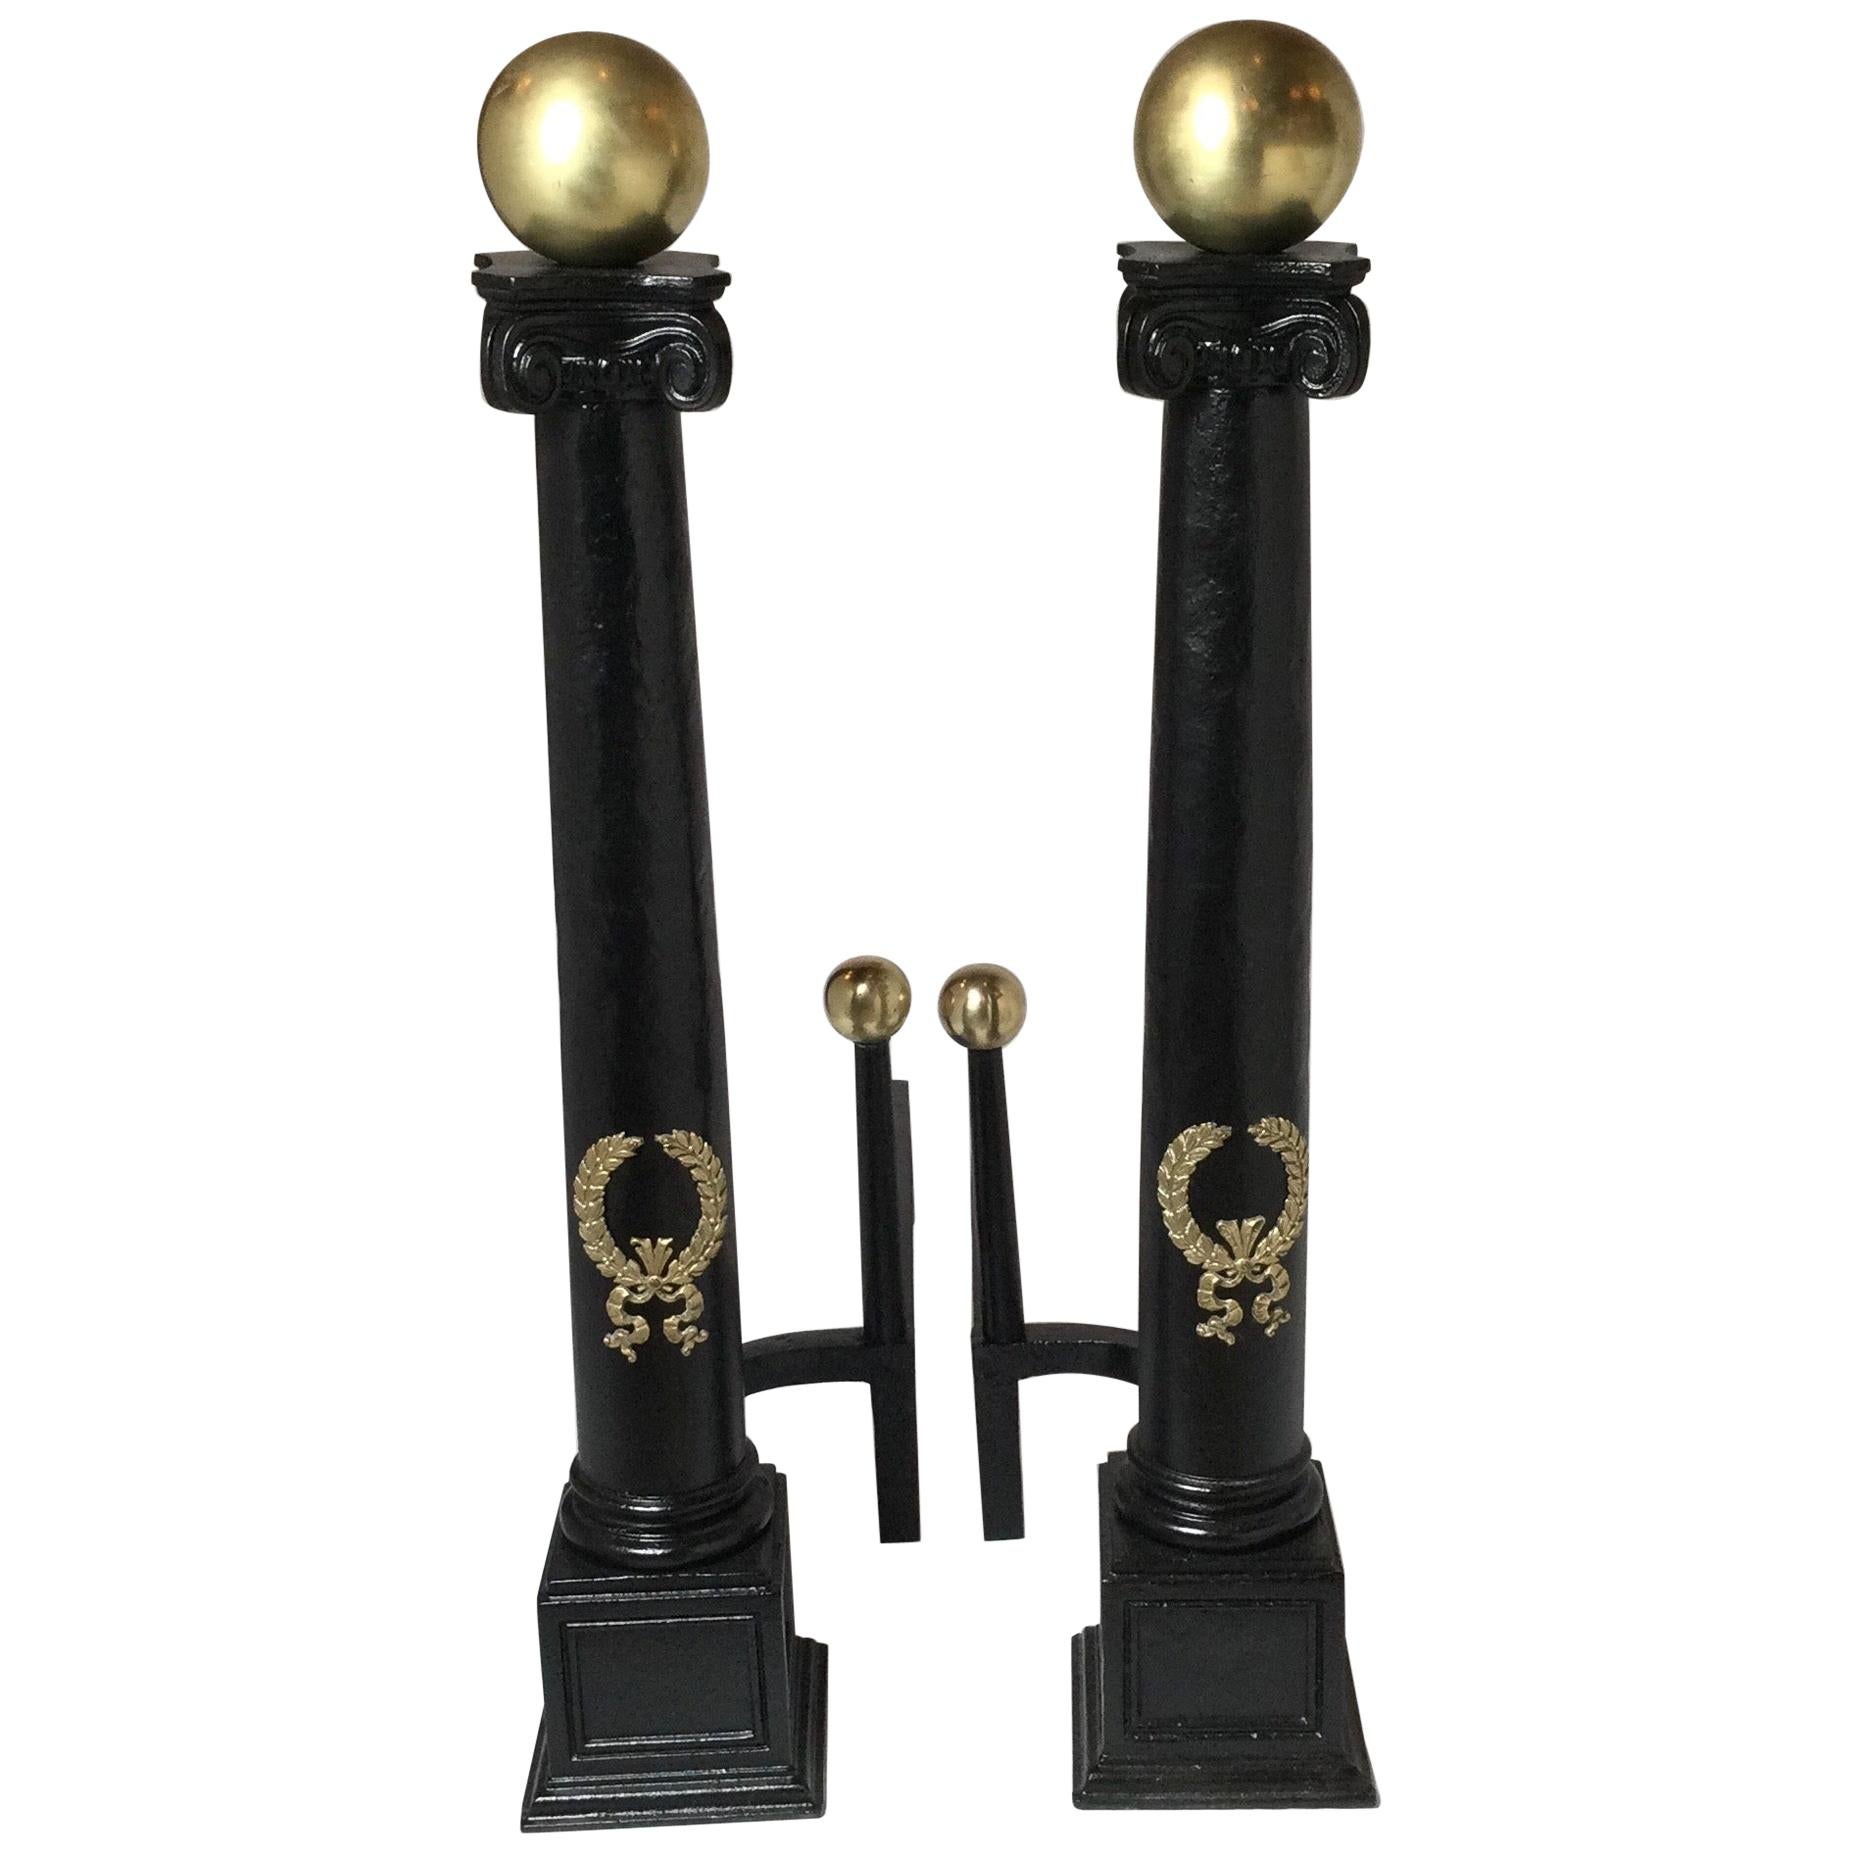 Circa 1900 Monumental Column Andirons With Large Brass Ball And Wreath Mounts
Large iron column capped with brass ball and wreath, Recently cleaned, polished and painted.
Great for a large fireplace.
  Dimensions: 36.5